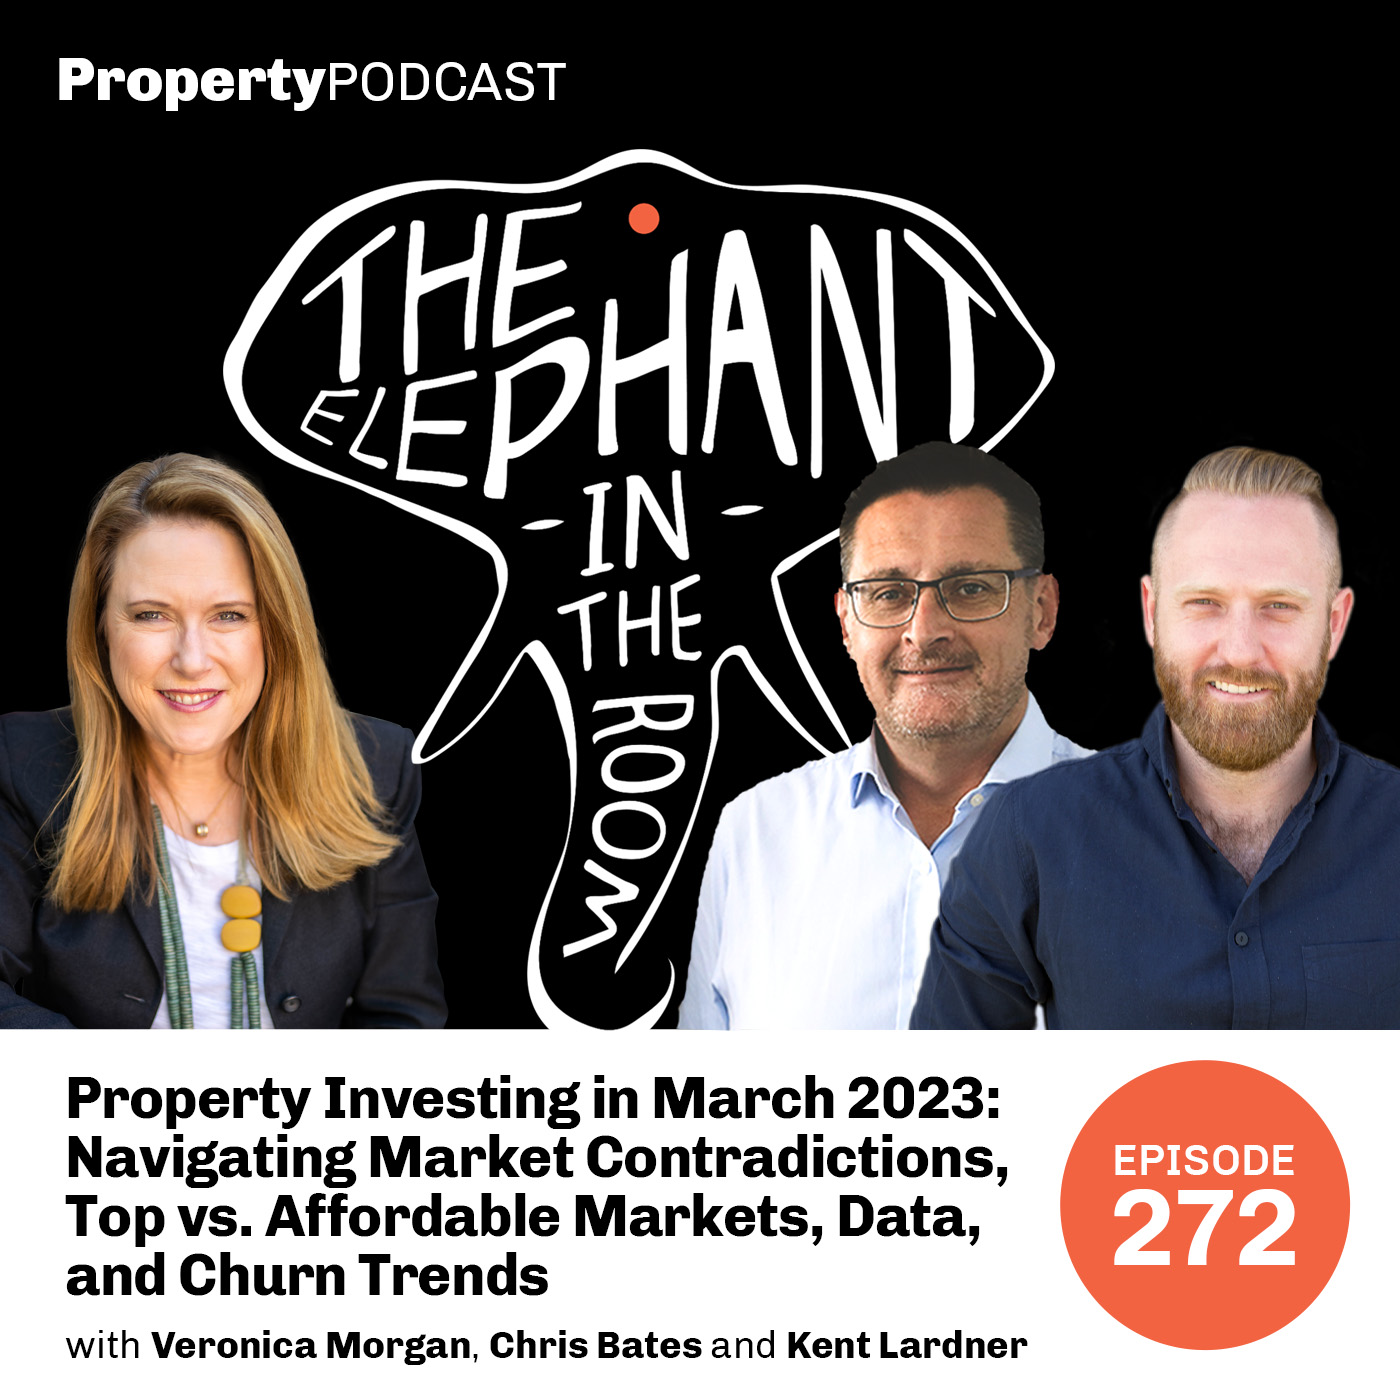 Property Investing in March 2023: Navigating Market Contradictions, Top vs. Affordable Markets, Data, and Churn Trends